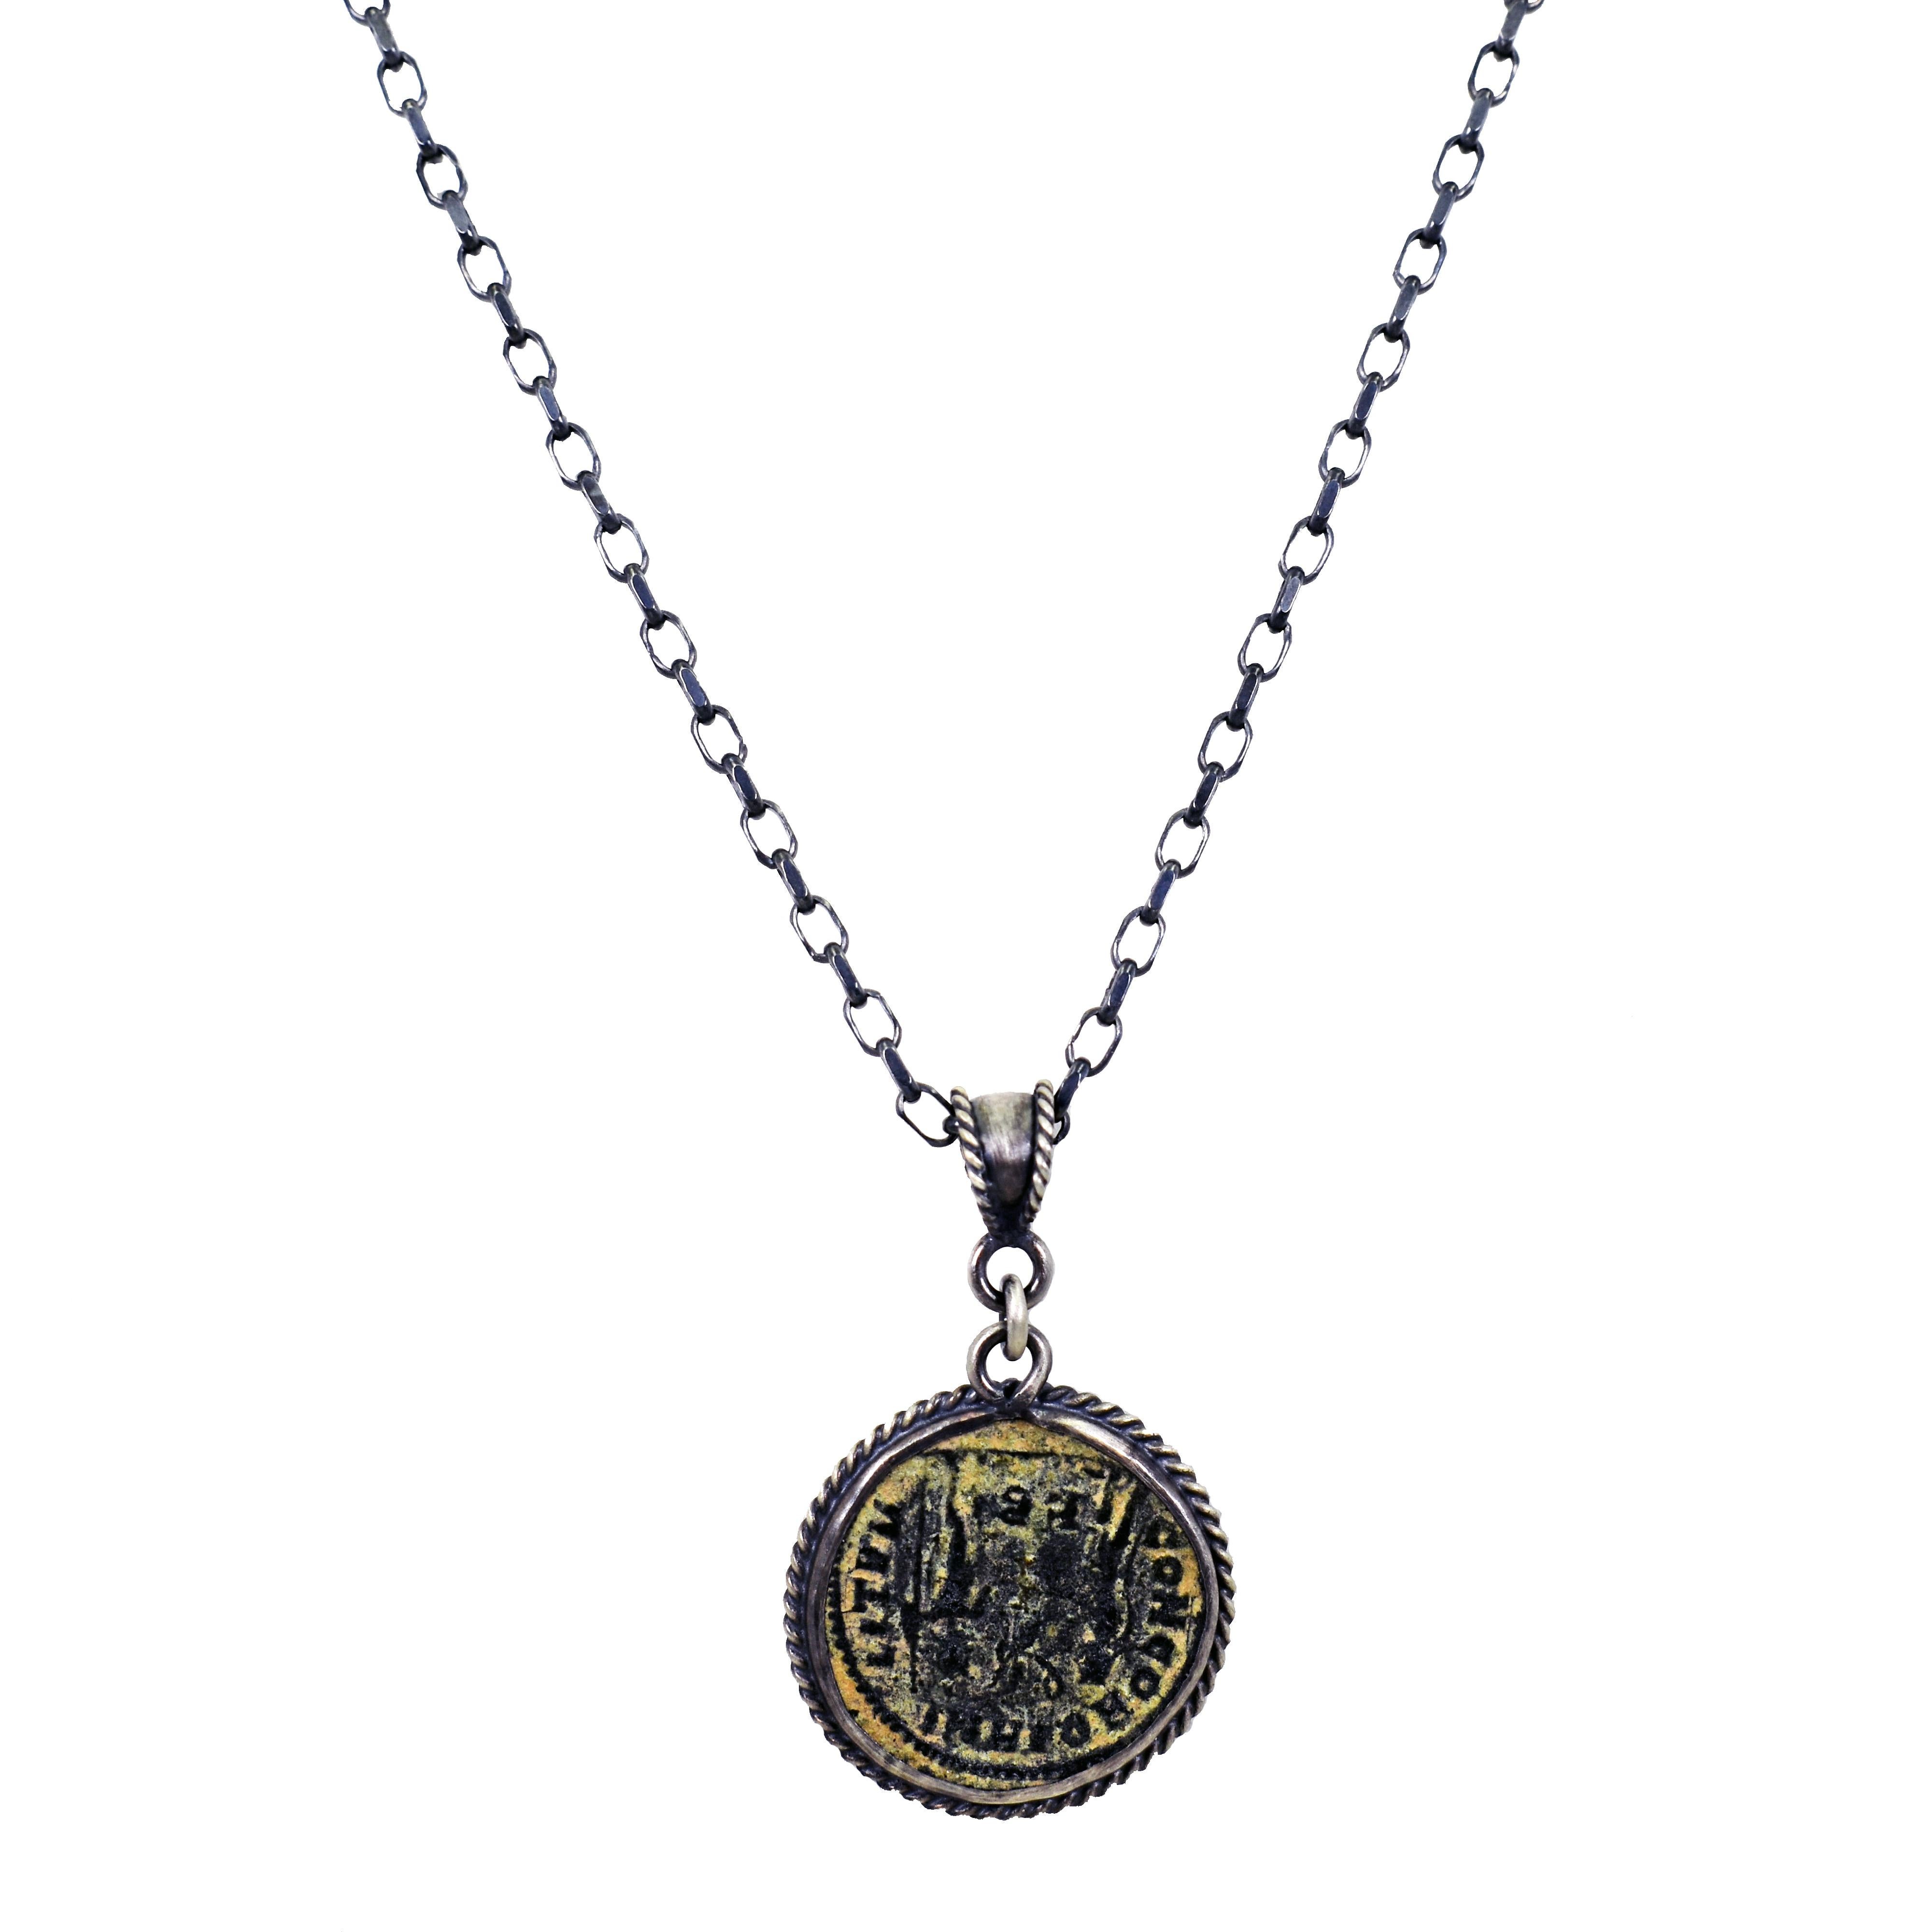 Authentic ancient Roman bronze coin (AE Antoninianus of Aurelian, 270-275 AD) oxidized sterling silver pendant with rope detail on 18 inch sterling silver cable chain necklace. Pendant, including bail, is 1.50 inch in length. Bronze coin is